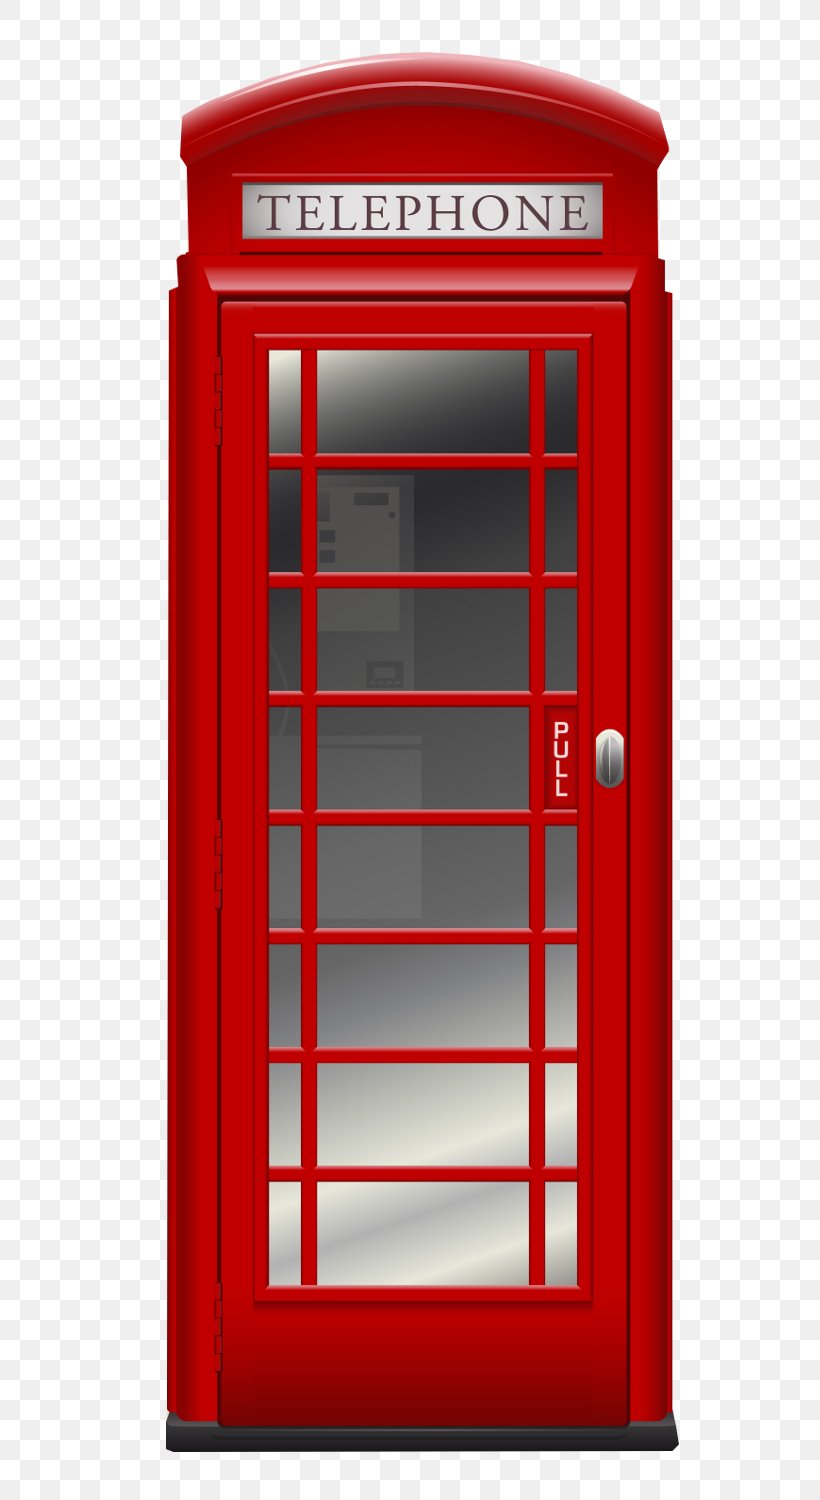 London IPhone Telephone Booth Red Telephone Box, PNG, 650x1500px, London, England, Iphone, Mobile Phones, Rectangle Download Free